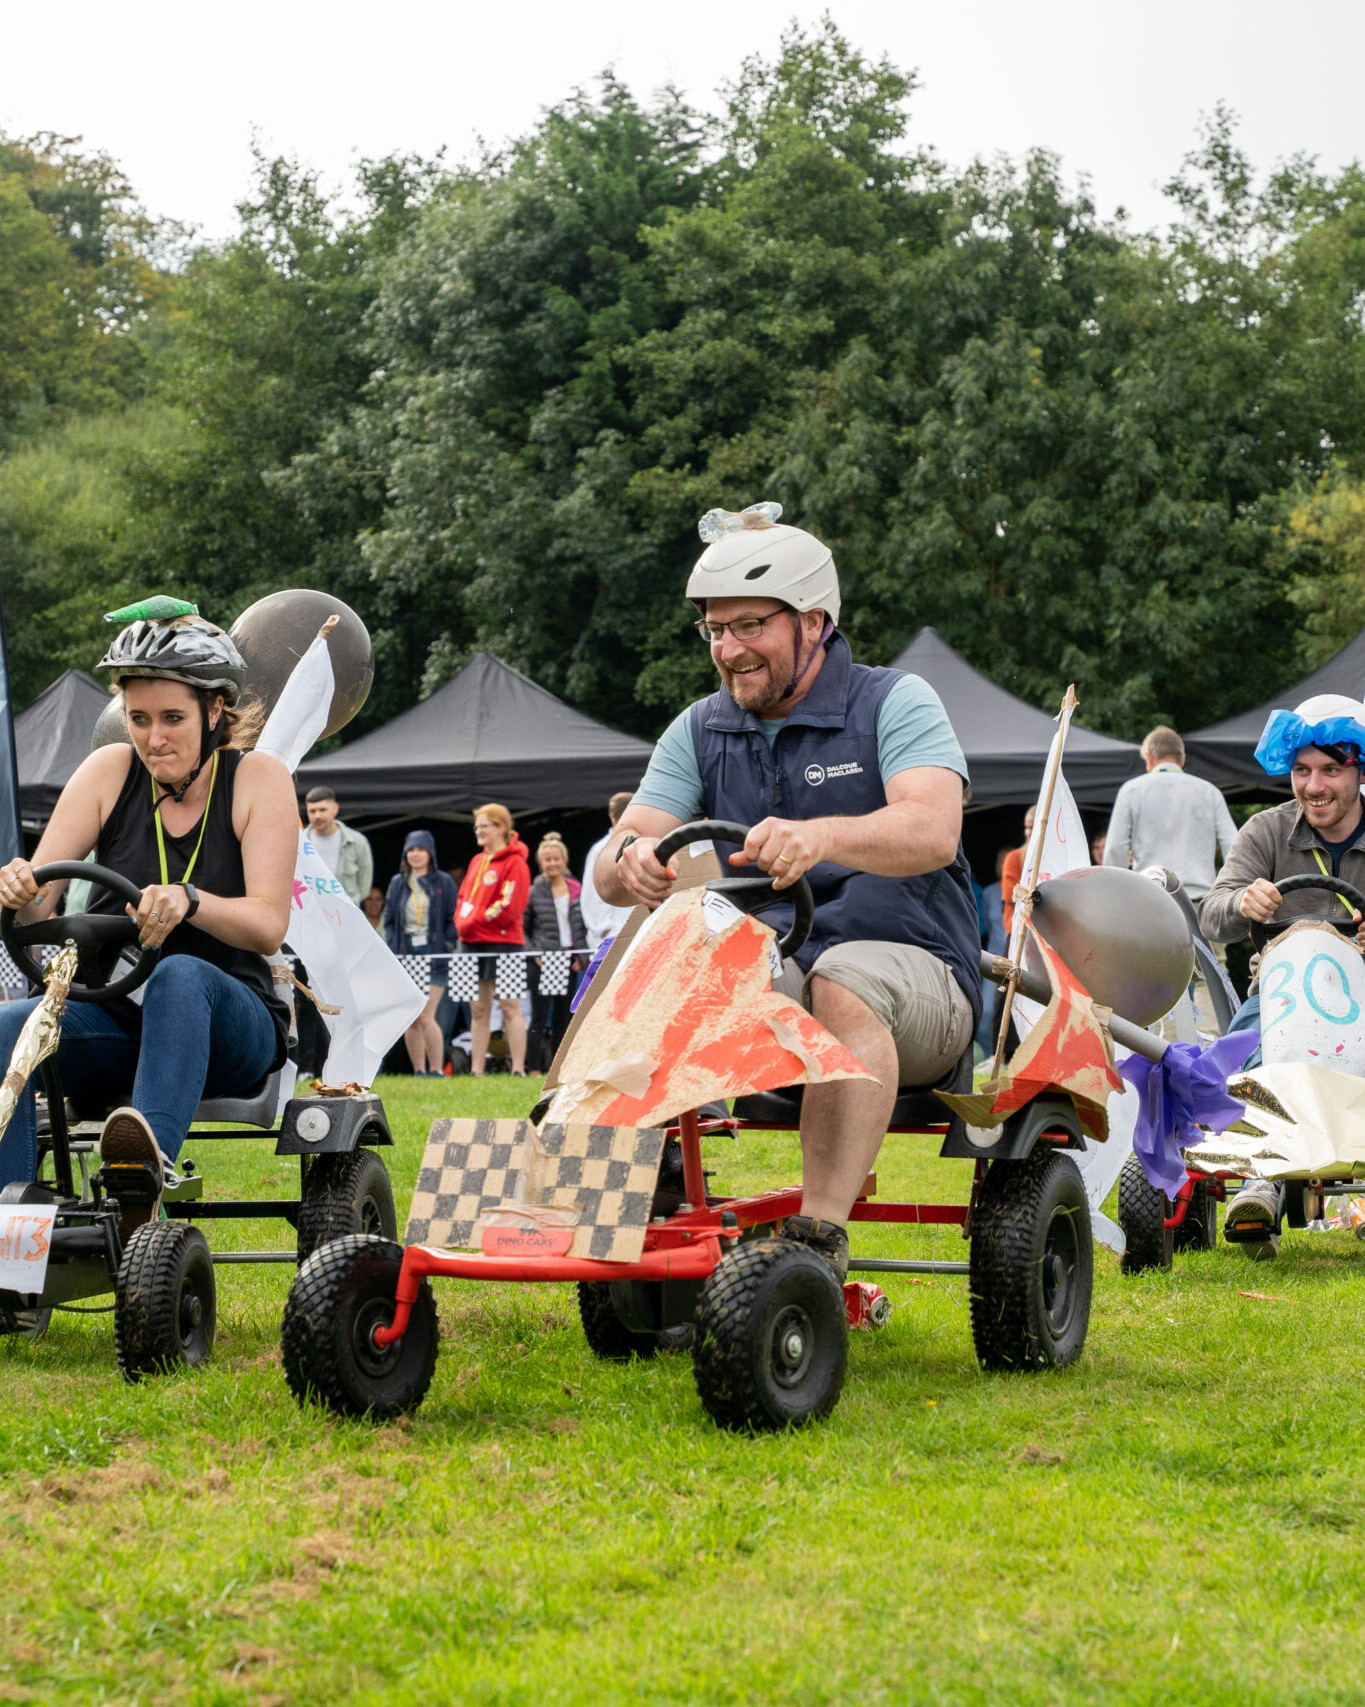 funny race on colourful carts during outdoor team building event